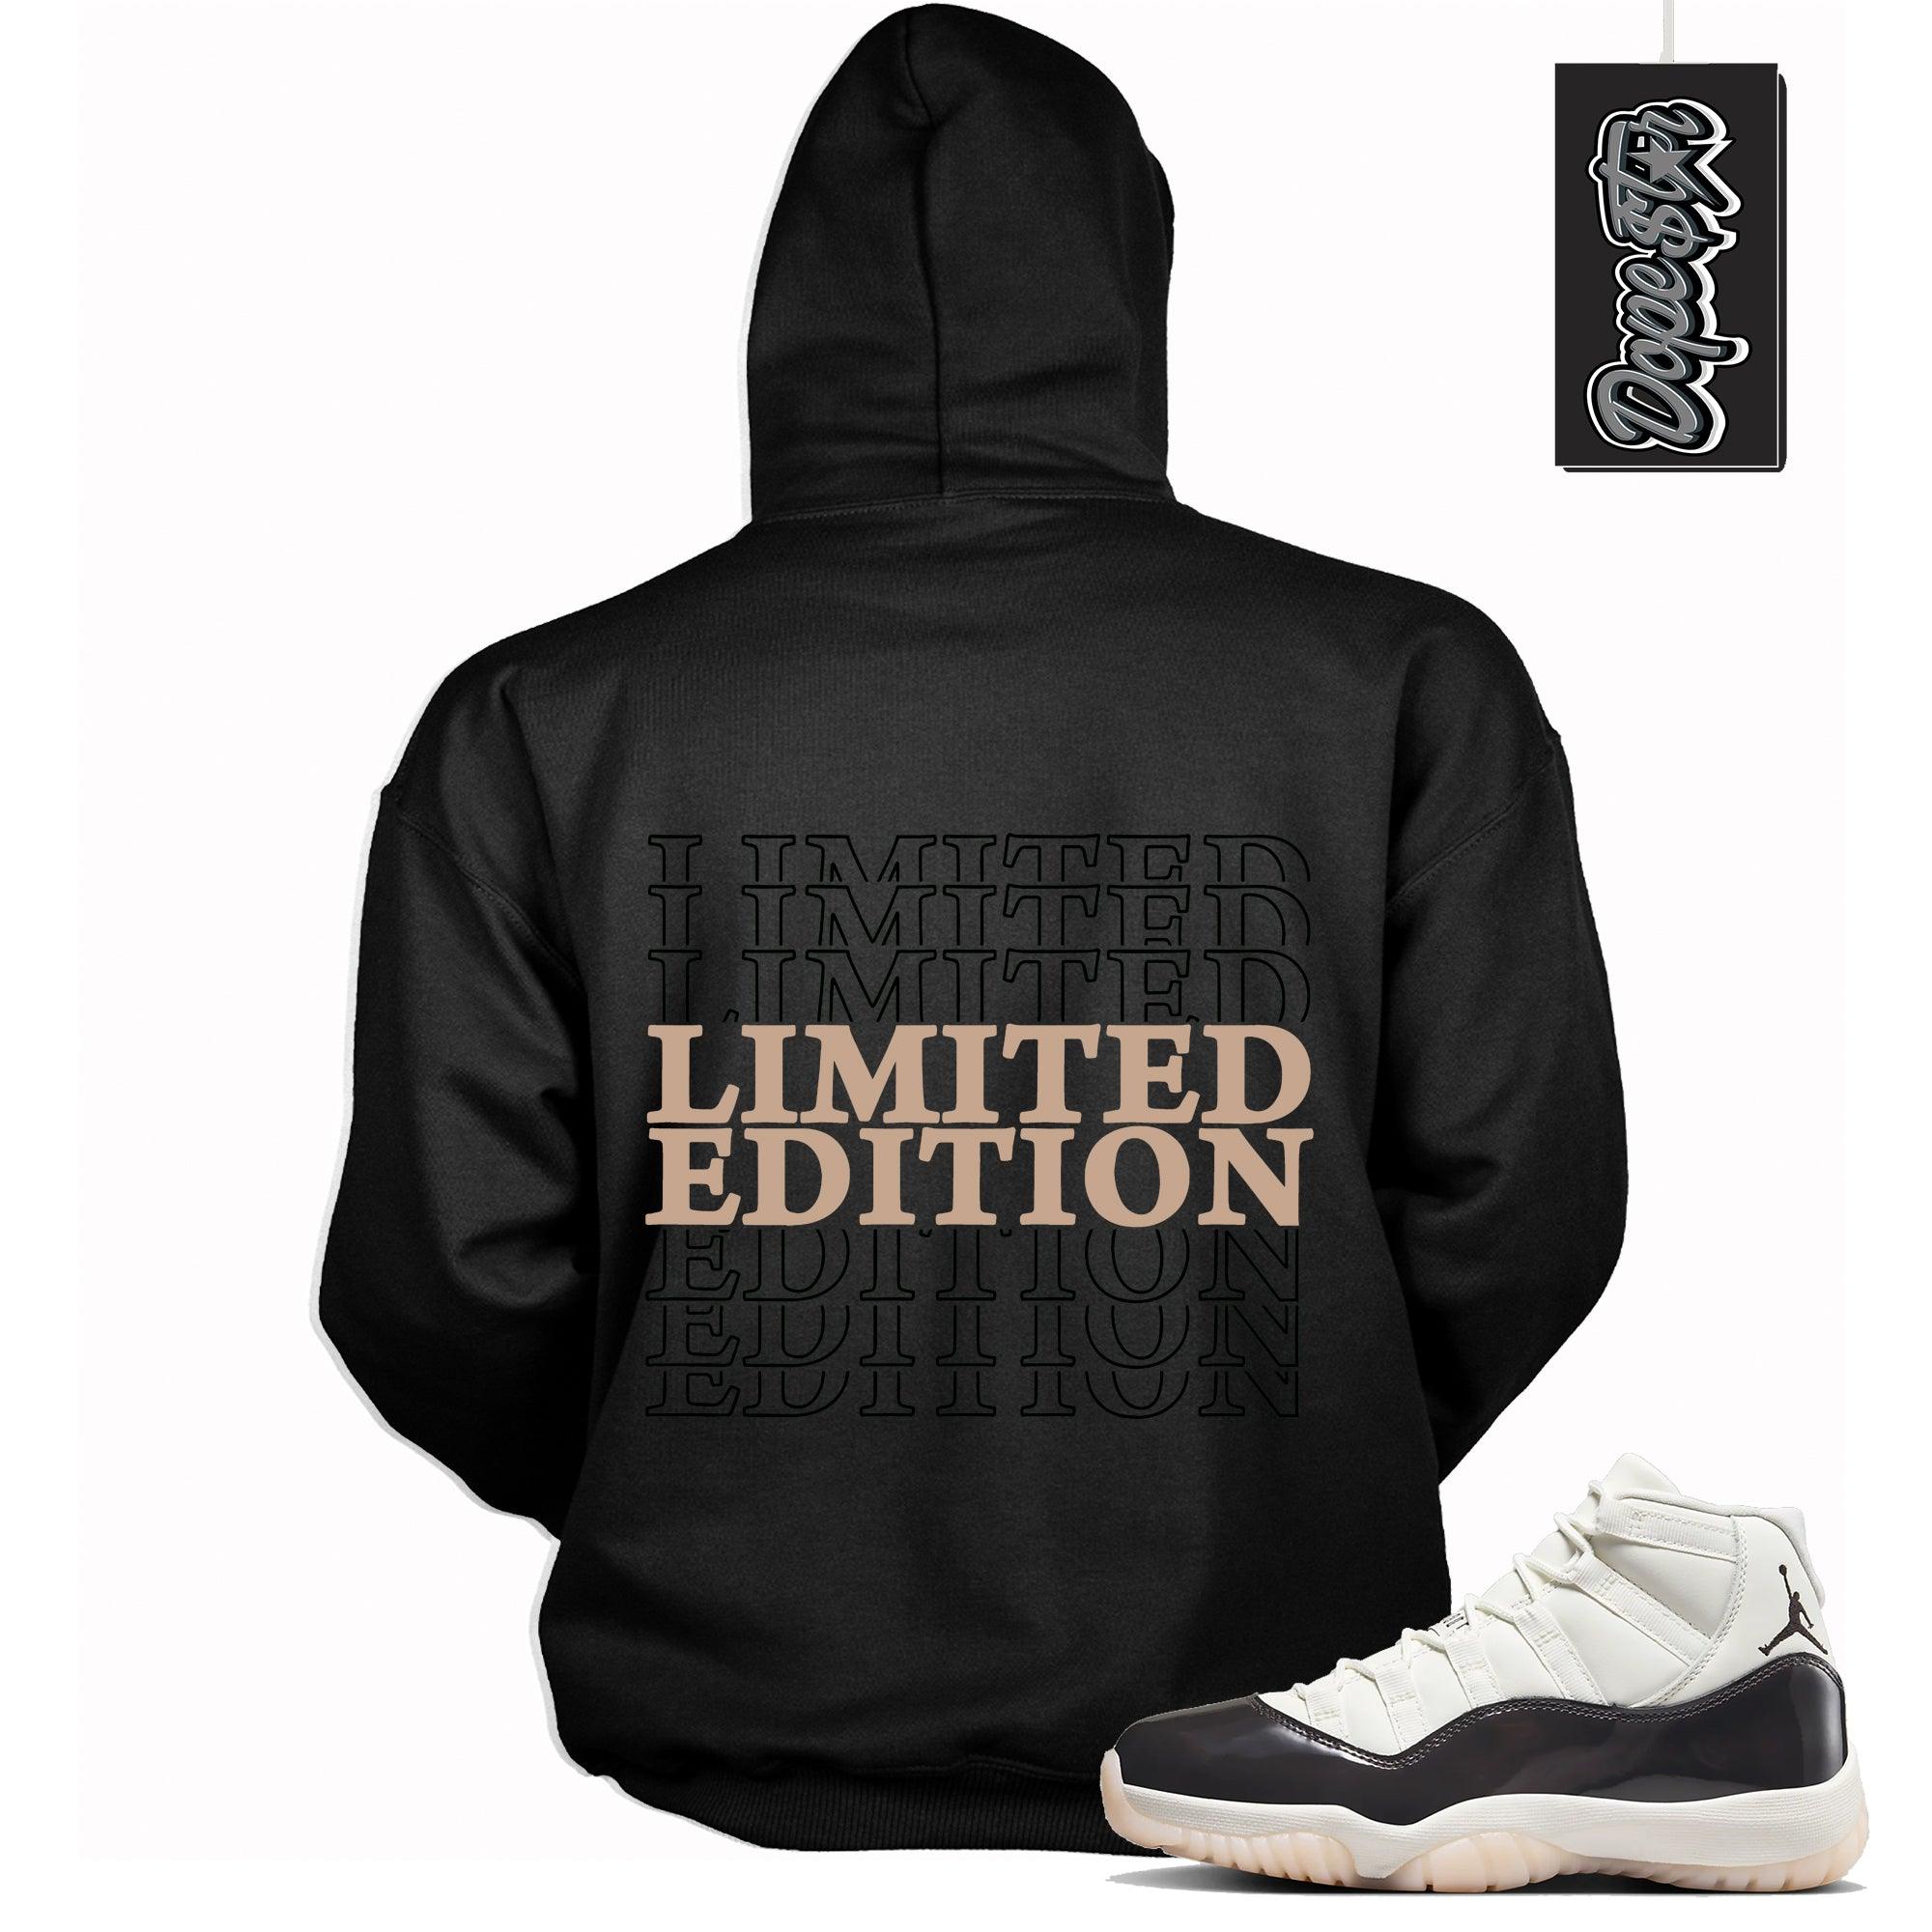 Cool Black Graphic Hoodie with “ Limited Edition “ print, that perfectly matches Air Jordan 11 Neapolitan sneakers